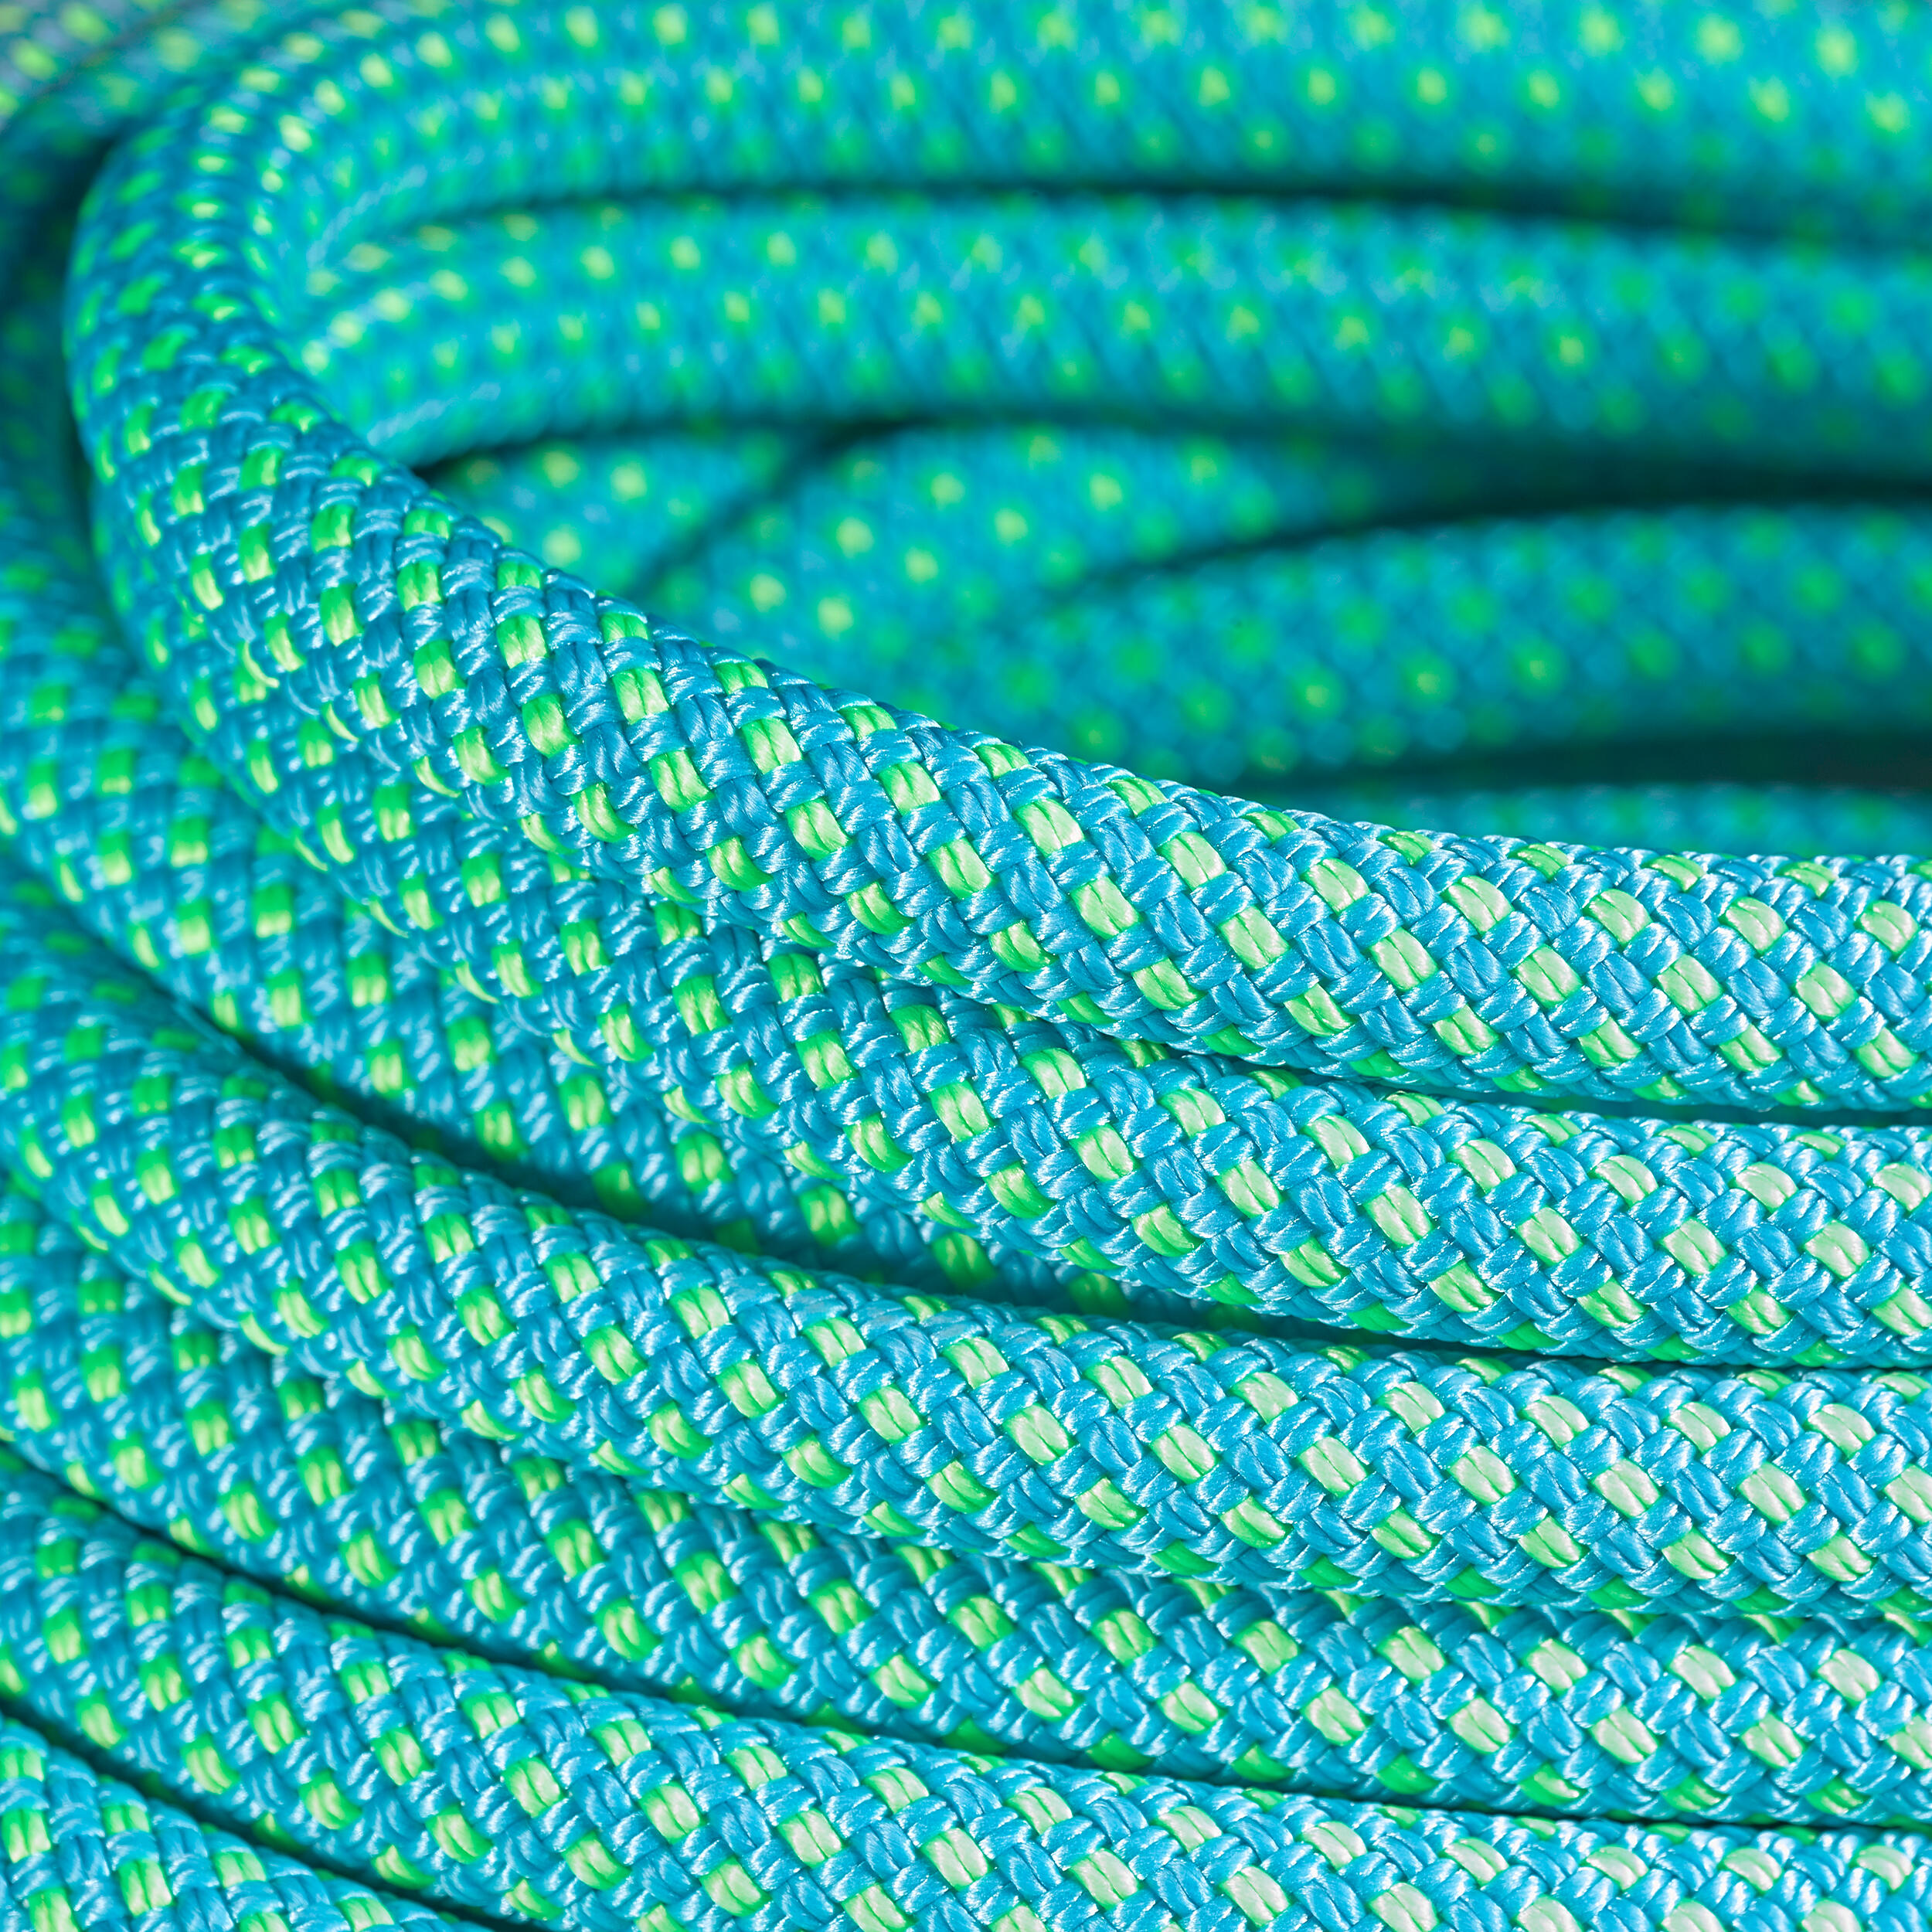 CLIMBING AND MOUNTAINEERING TRIPLE ROPE STANDARD 8.9 mm x 60 m - EDGE DRY TURQUOISE 2/4